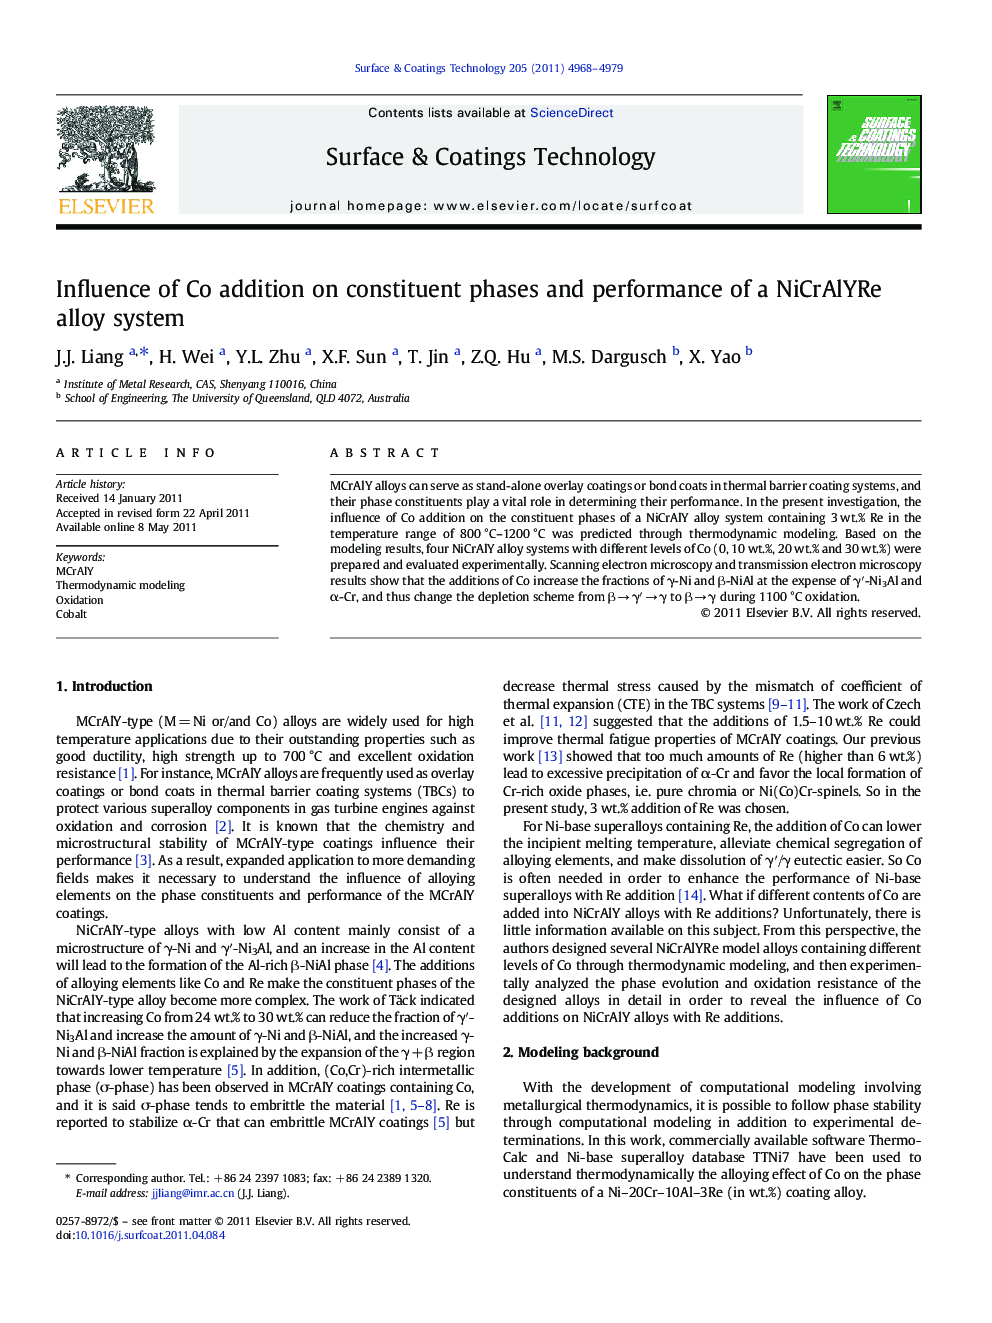 Influence of Co addition on constituent phases and performance of a NiCrAlYRe alloy system